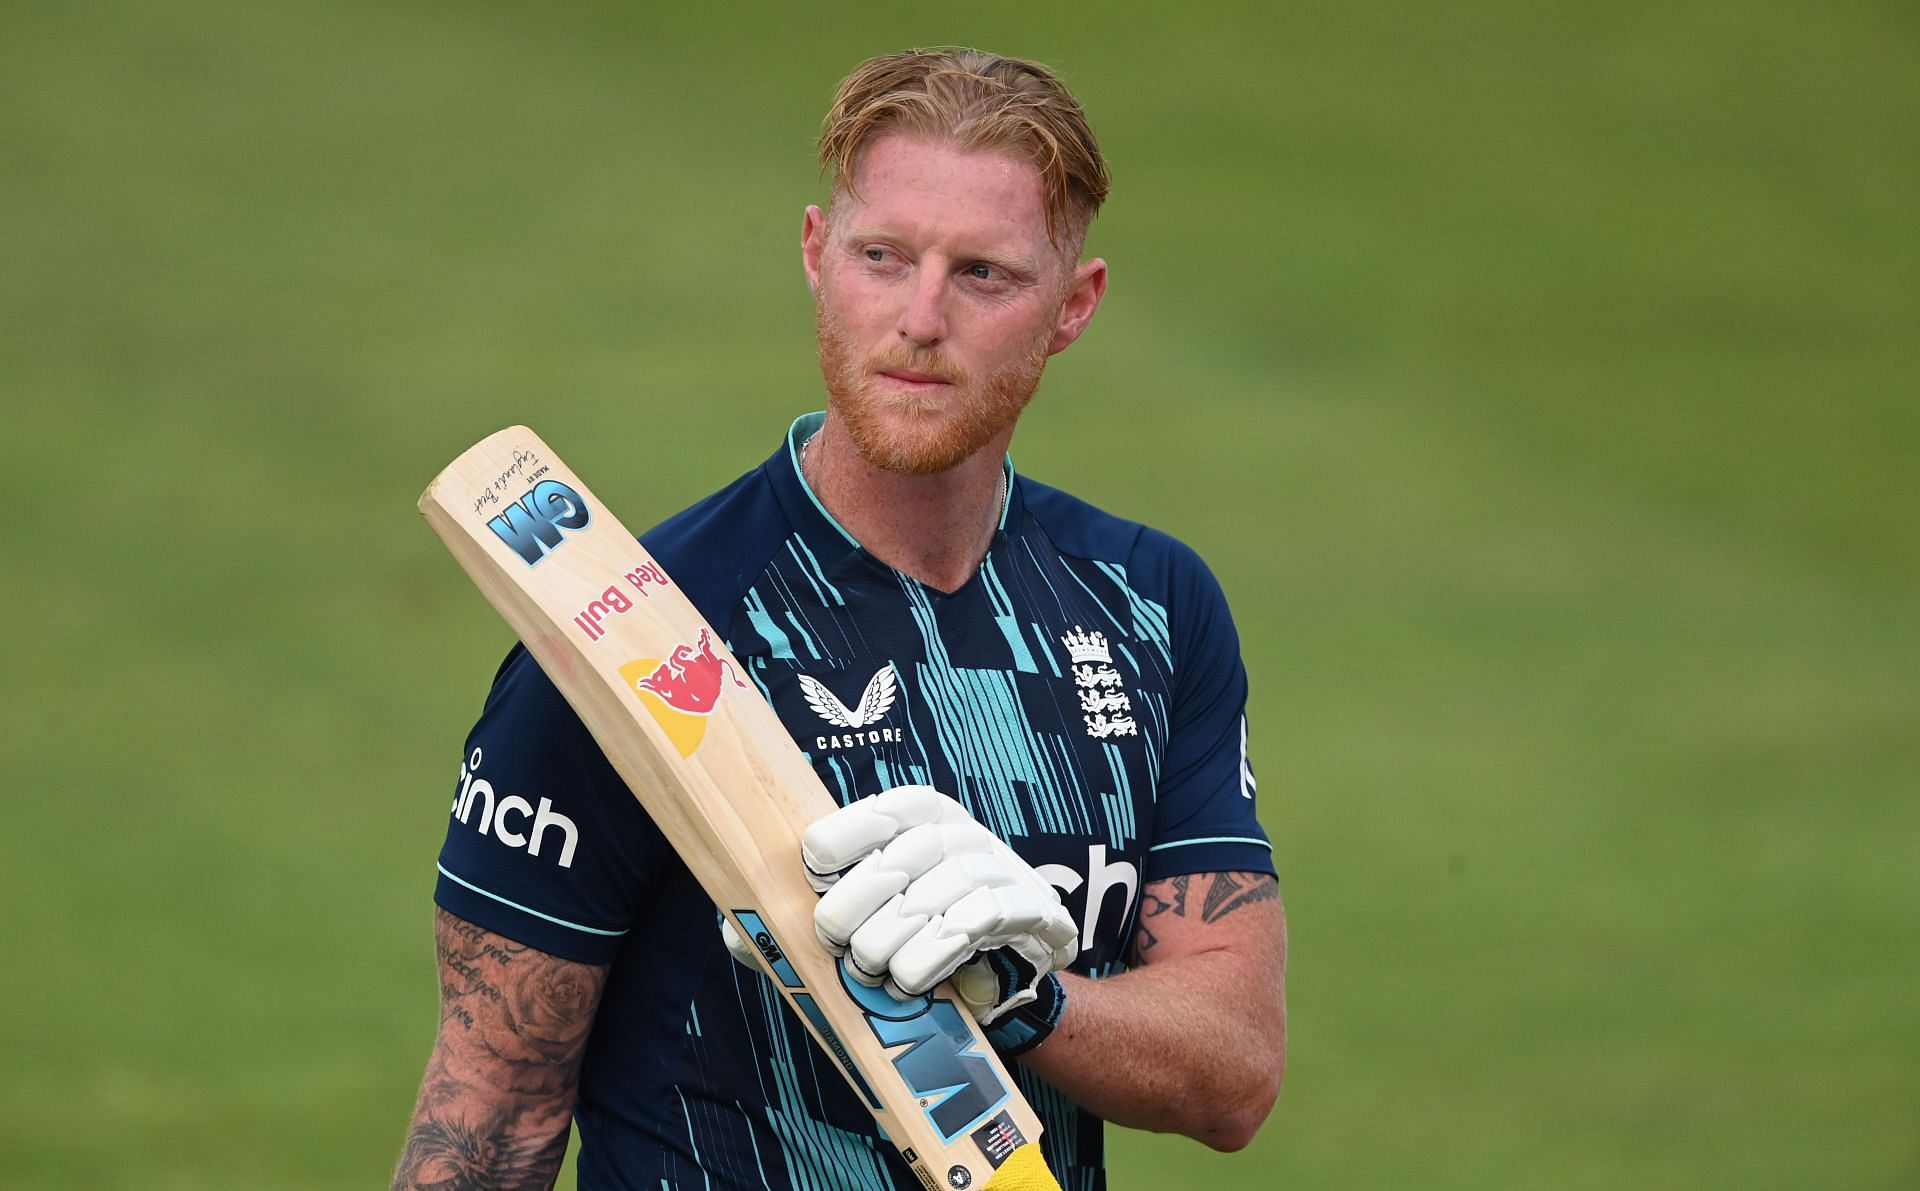 Ben Stokes recently announced his retirement from ODI cricket